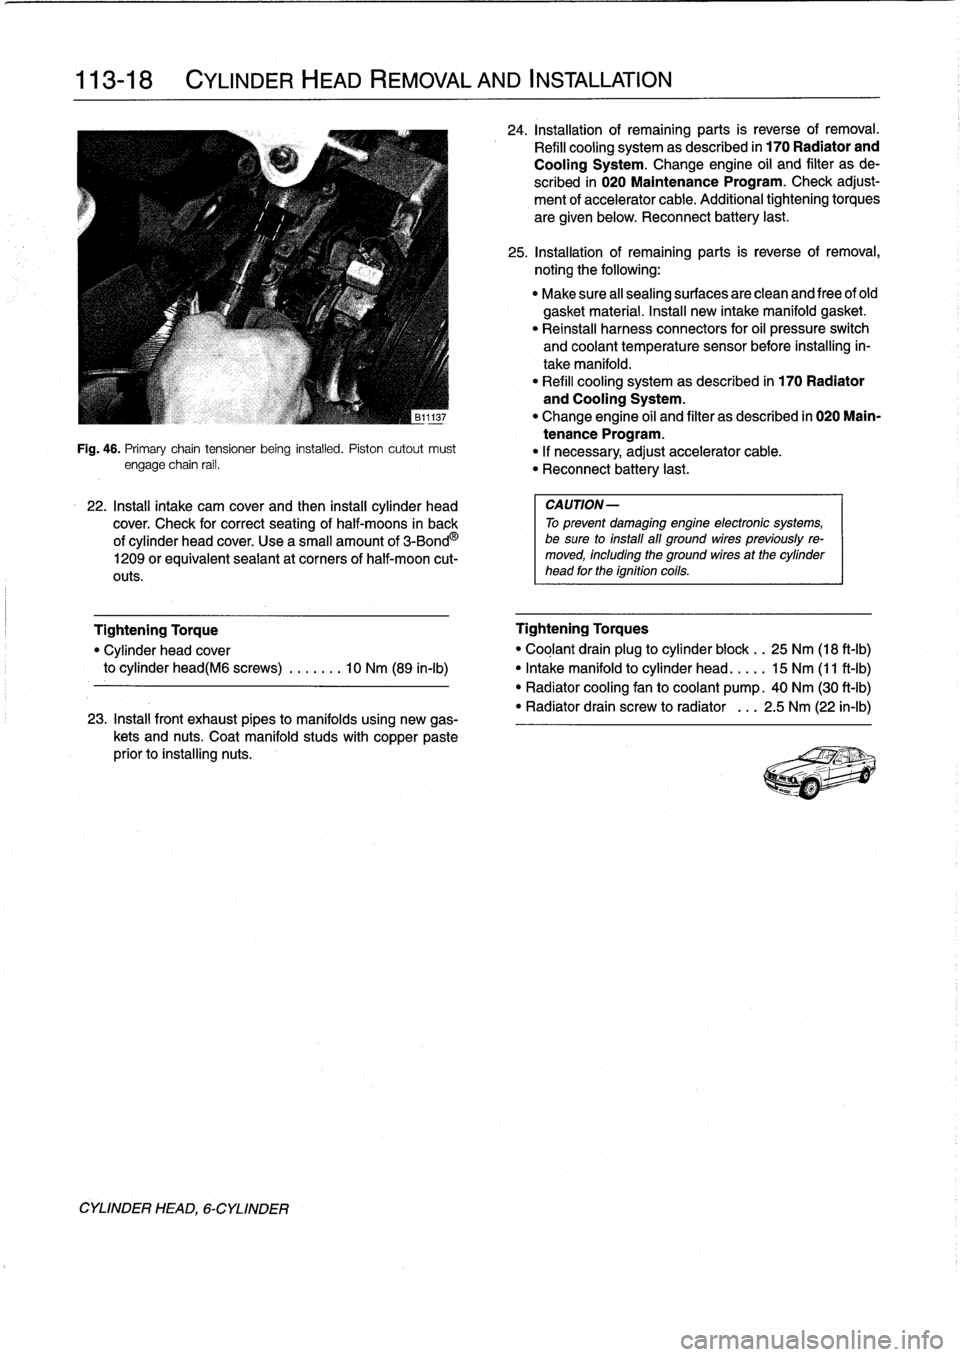 BMW 328i 1994 E36 Owners Guide 
113-
1
8

	

CYLINDER
HEAD
REMOVAL
AND
INSTALLATION

CYLINDER
HEAD,
6-CYLINDER

Fig
.
46
.
Primary
chaintensioner
being
installed
.
Piston
cutout
must
engage
chain
rail
.

22
.
Install
intake
cam
cov